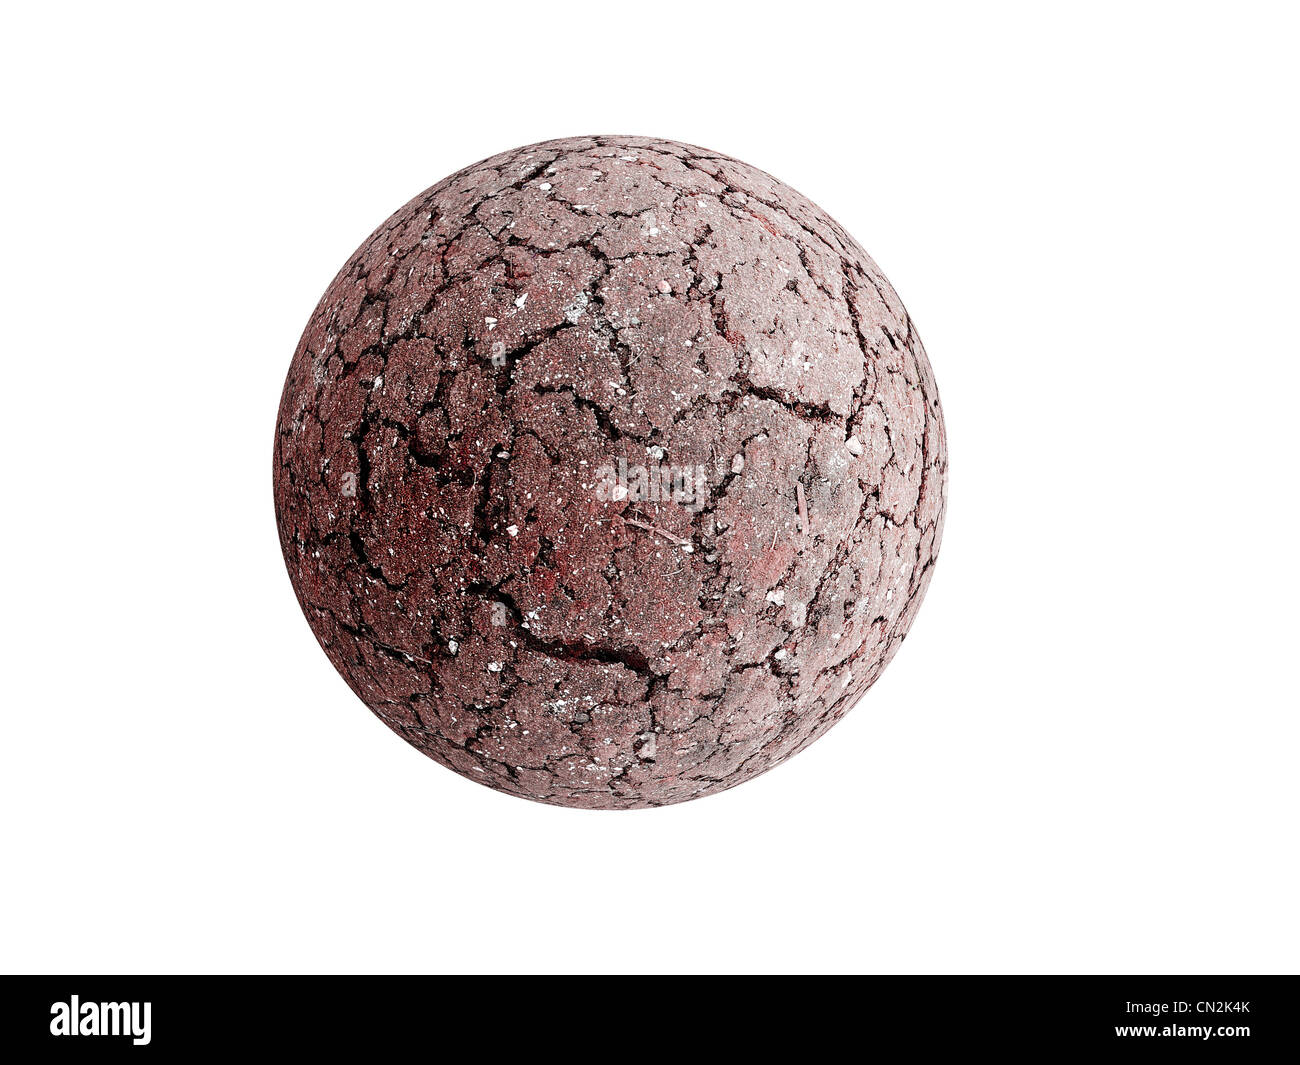 Dried and cracked Earth sphere as global warming concept Stock Photo